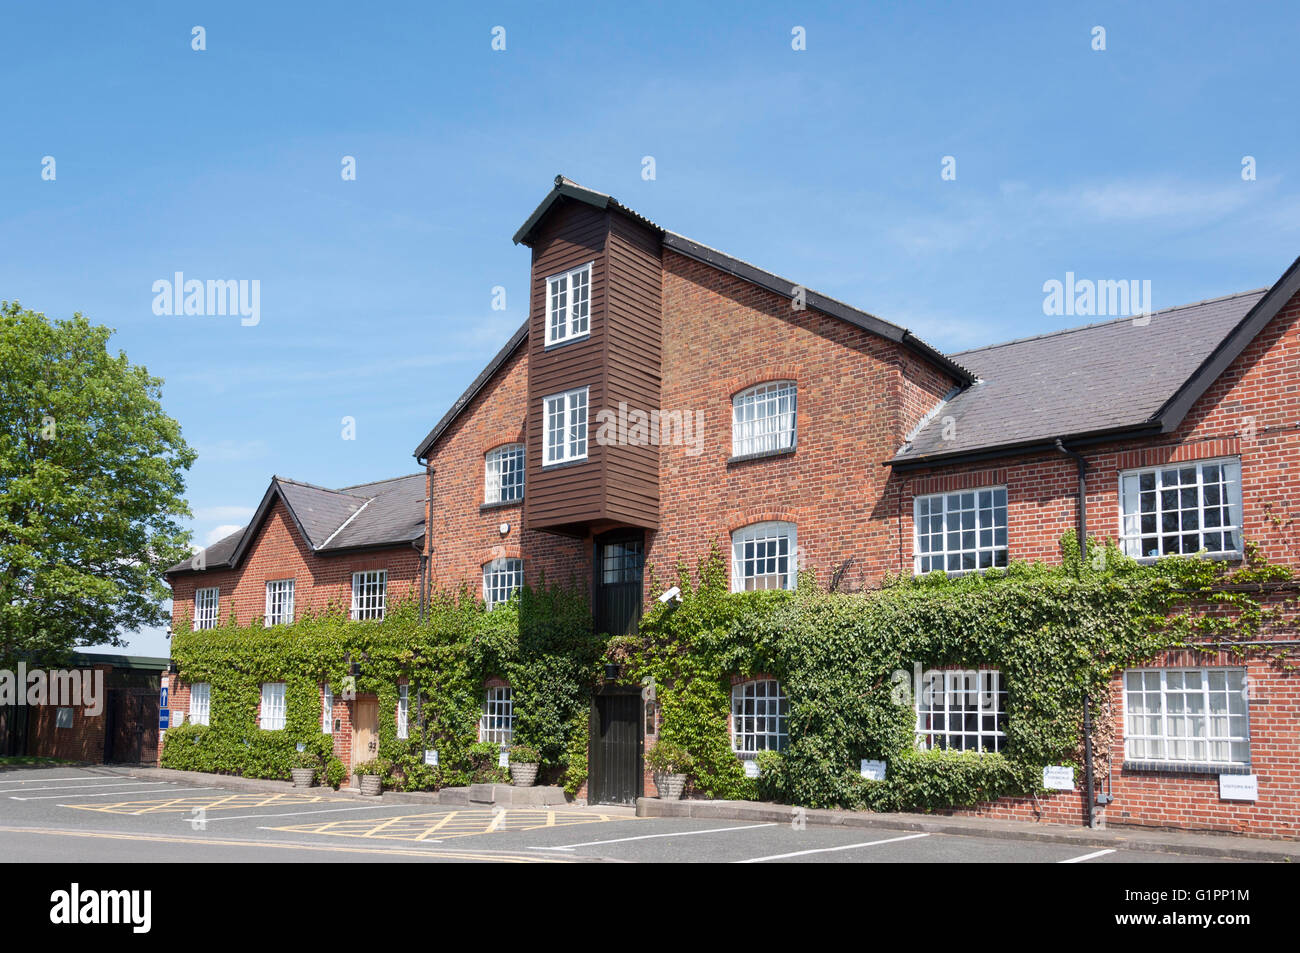 The Old Mill House, Horton Road, Stanwell Moor, Surrey, England, United Kingdom Stock Photo